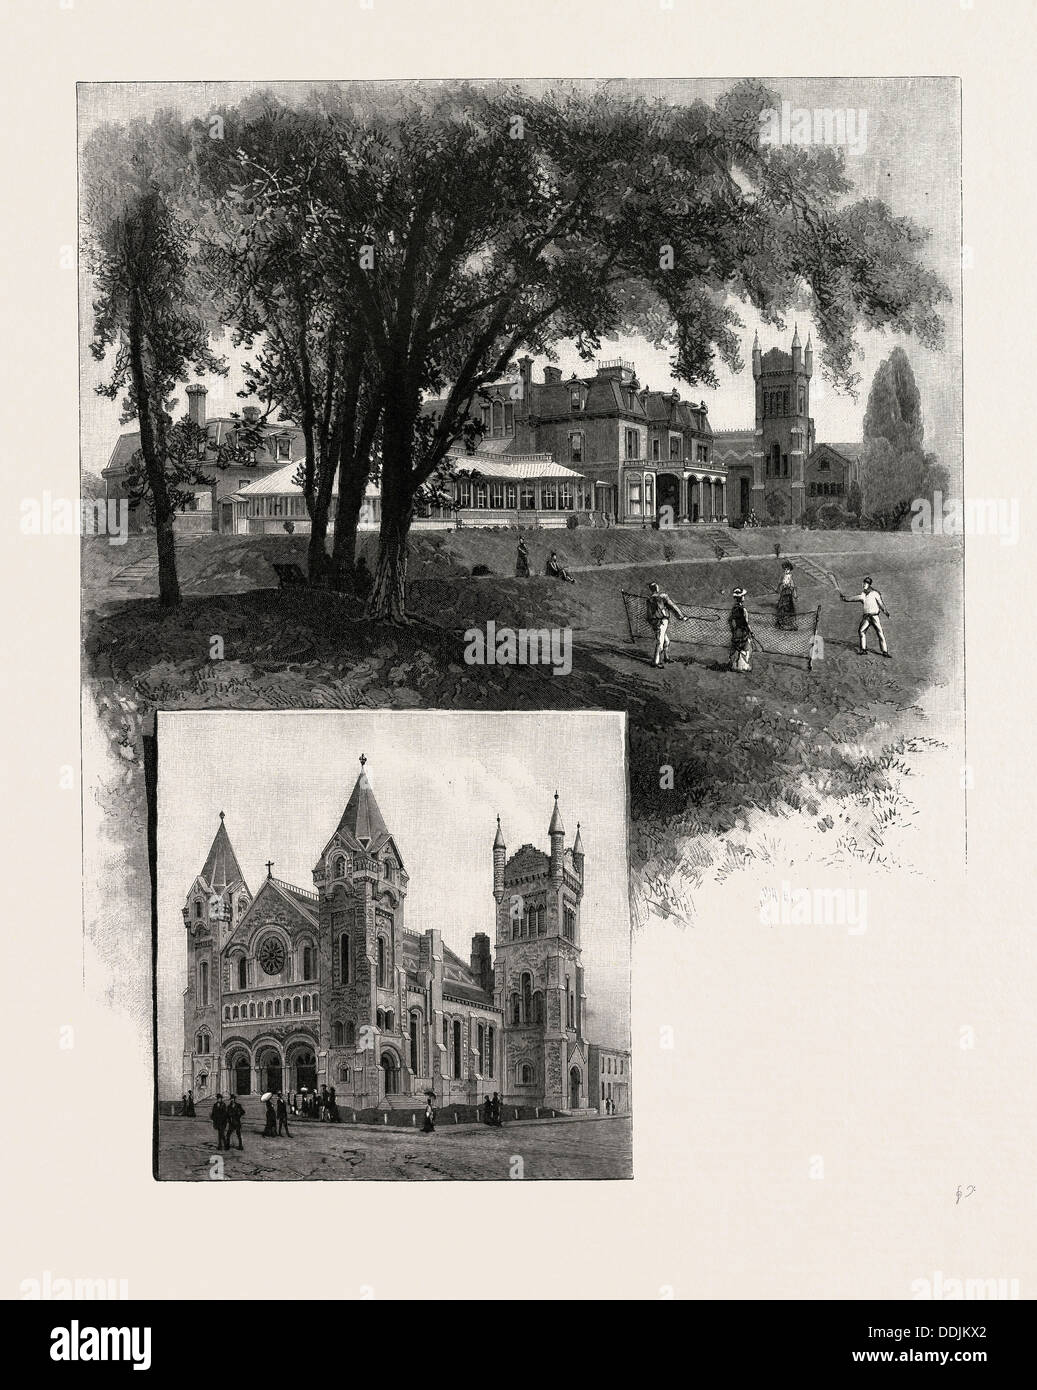 LIEUTENANT-GOVERNOR'S RESIDENCE (TOP); ST. ANDREW'S CHURCH (BOTTOM), TORONTO AND VICINITY, CANADA, NINETEENTH CENTURY ENGRAVING Stock Photo